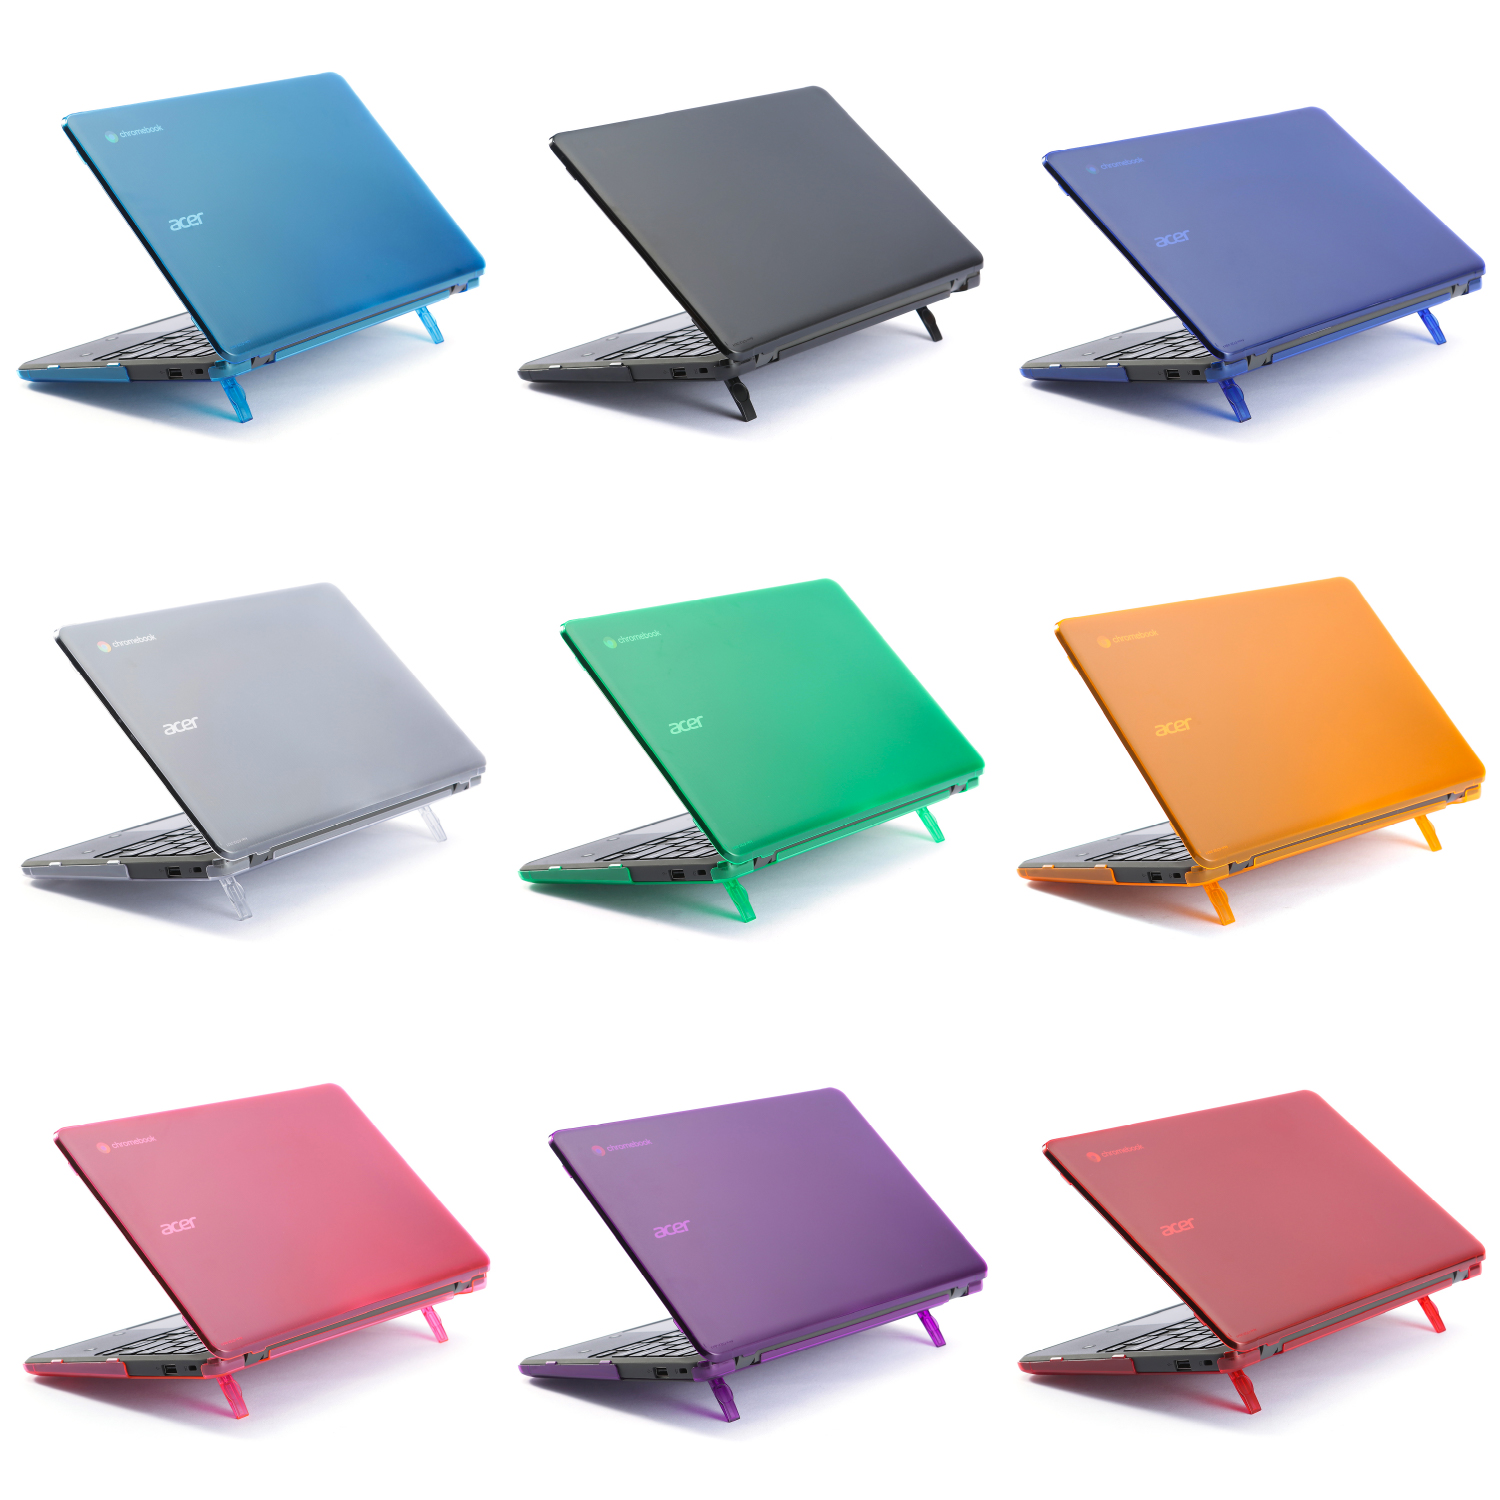 mCover Hard Shell case for Acer Chromebook 311 C722 series